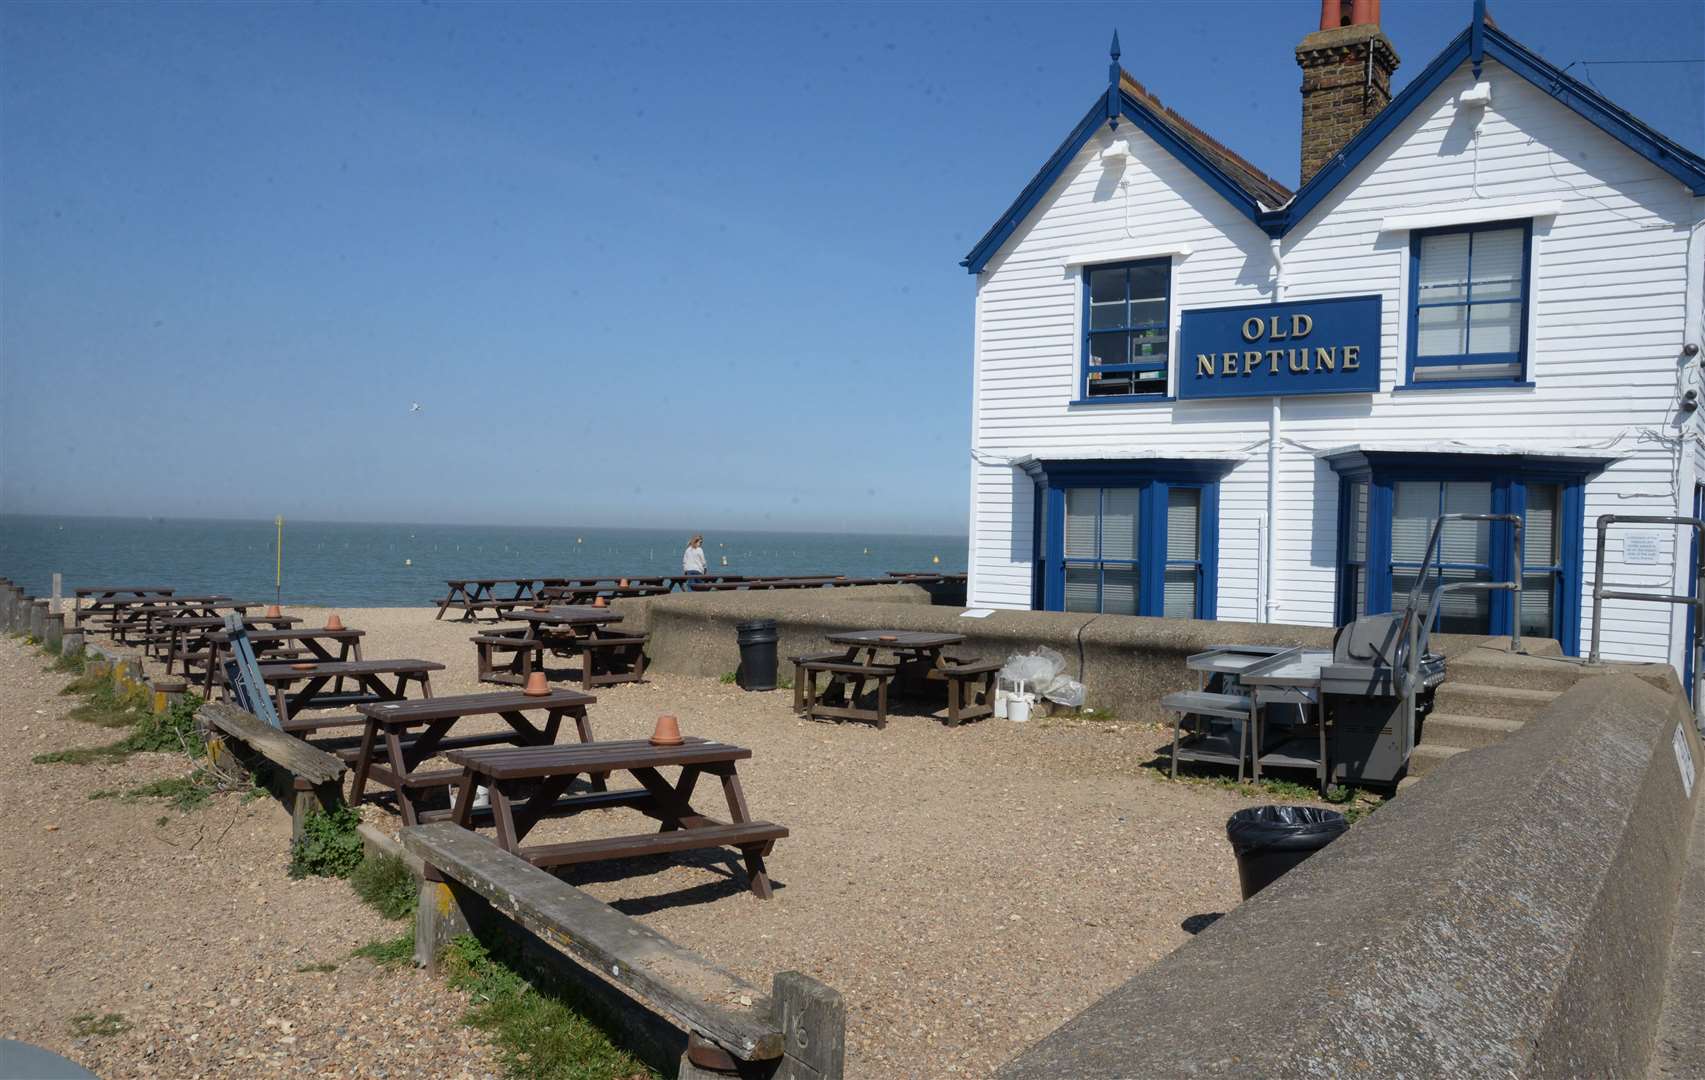 The Old Neptune is a popular beachfront pub